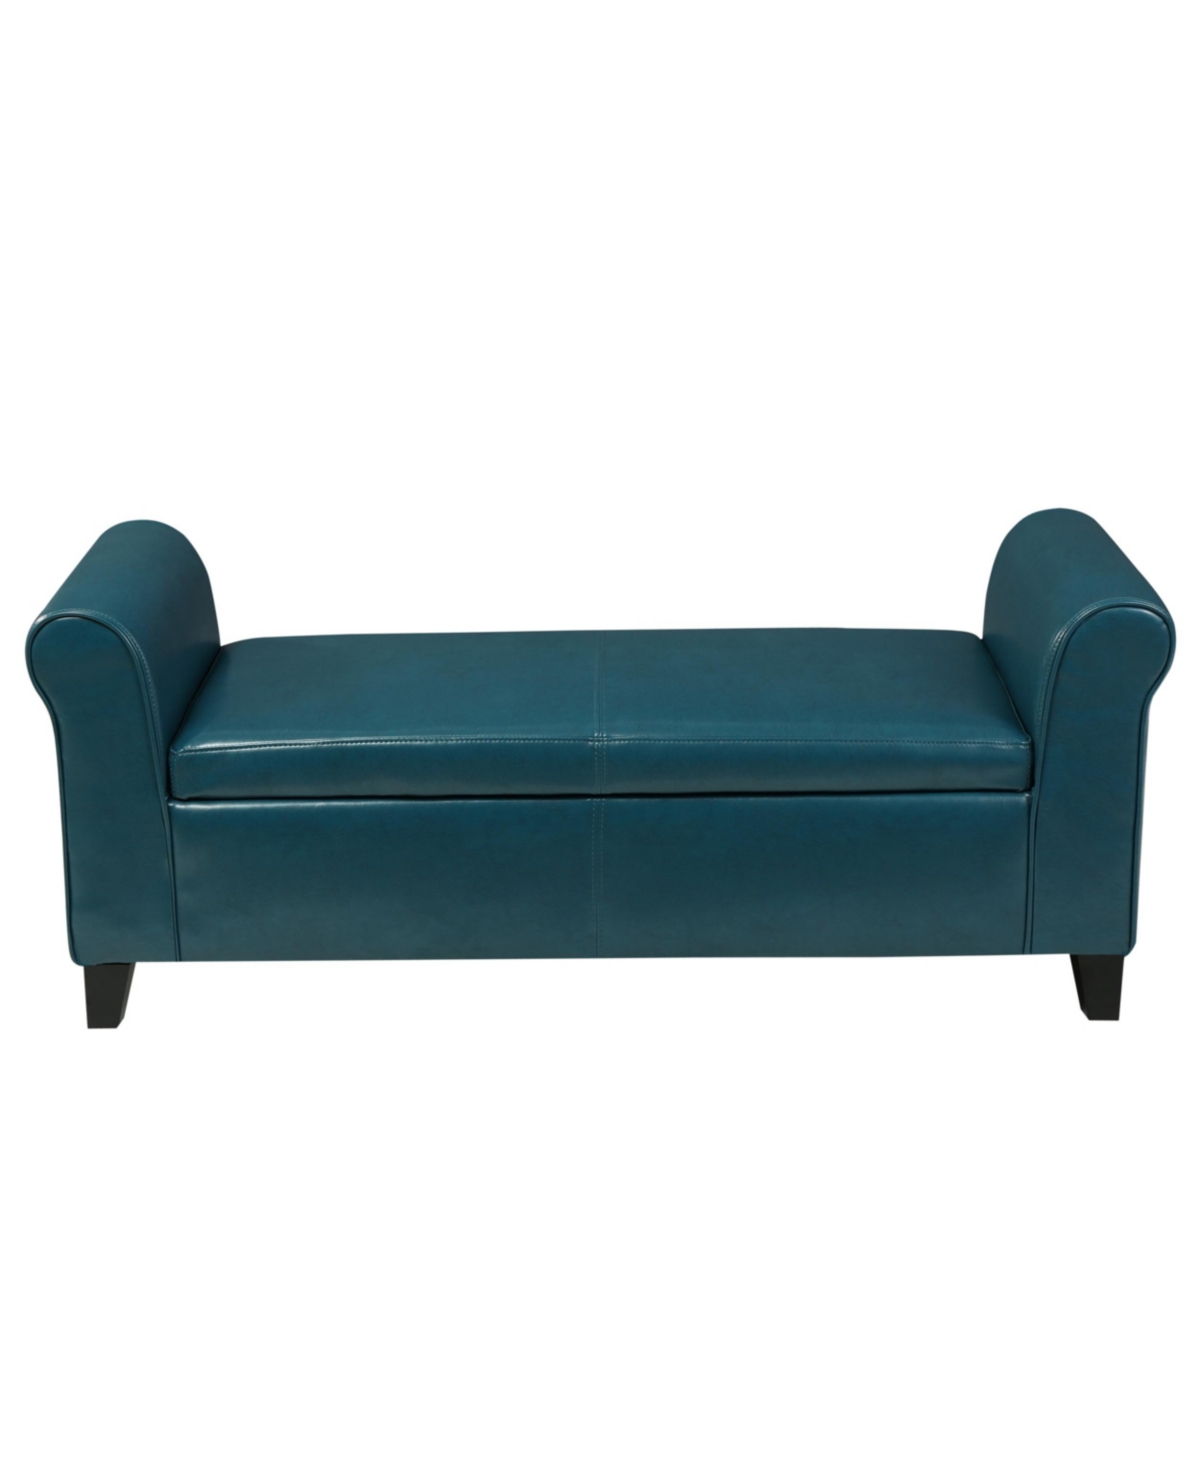 Noble House Hayes Contemporary Upholstered Storage Ottoman Bench With Rolled Arms In Teal